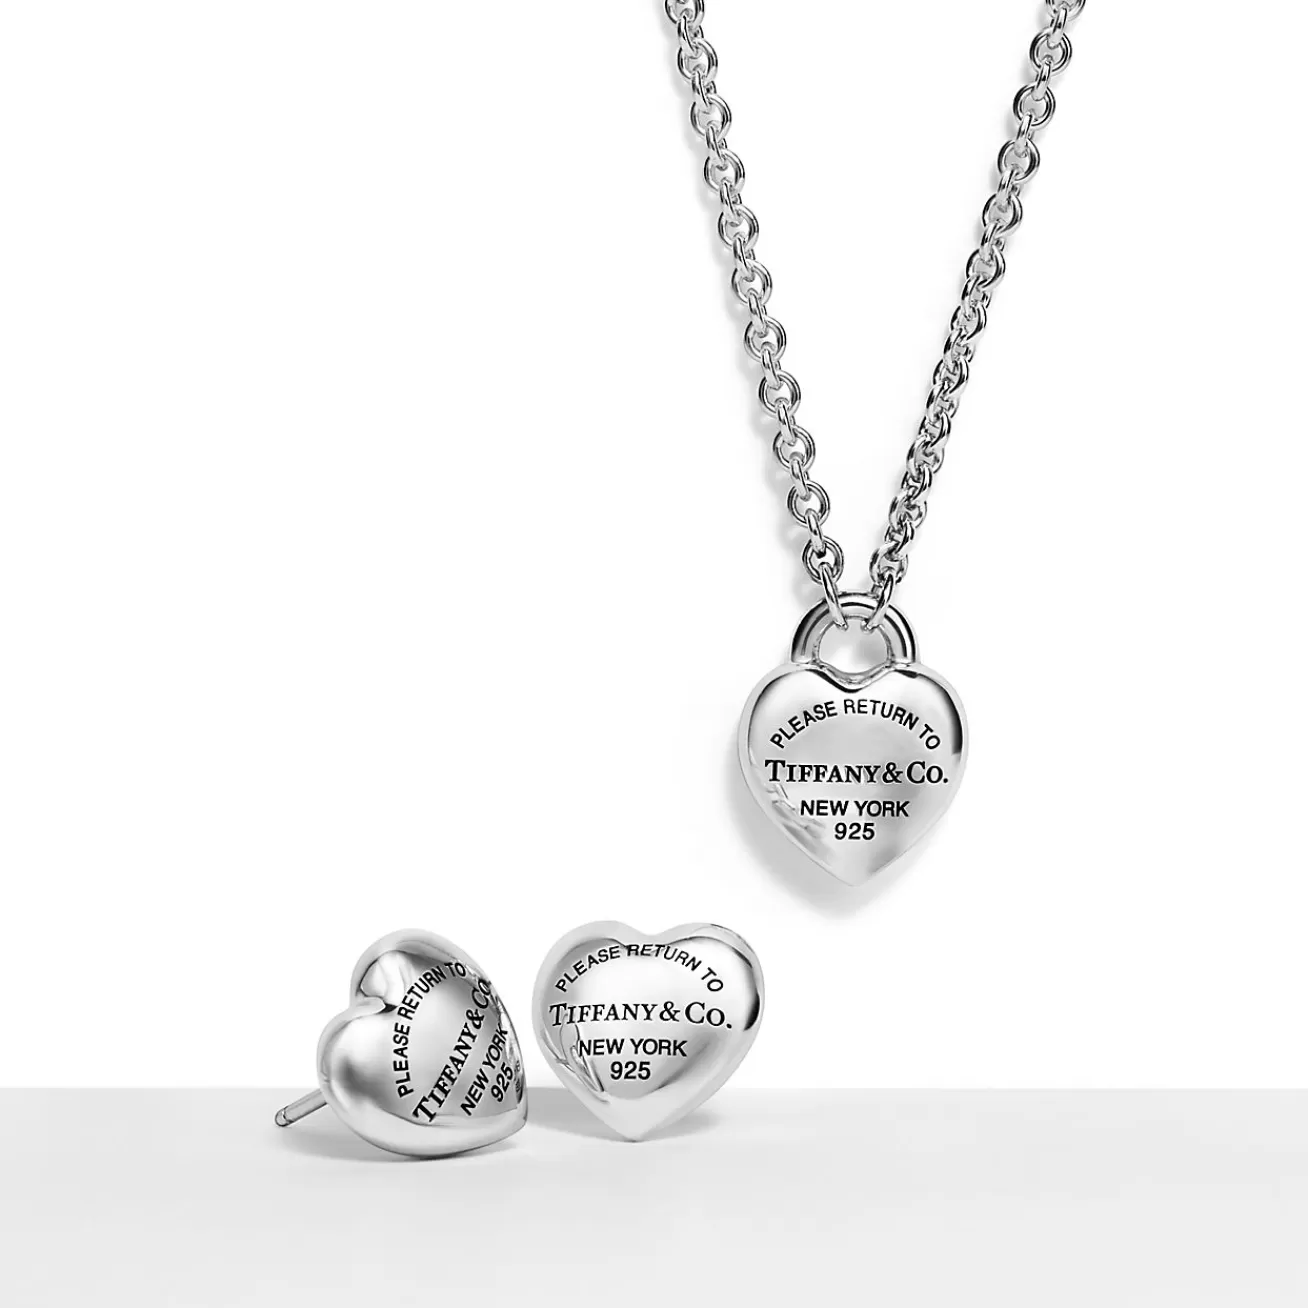 Tiffany & Co. Return to Tiffany® Full Heart Tag Pendant and Earrings Set in Sterling Silver | ^ Necklaces & Pendants | Gifts for Her